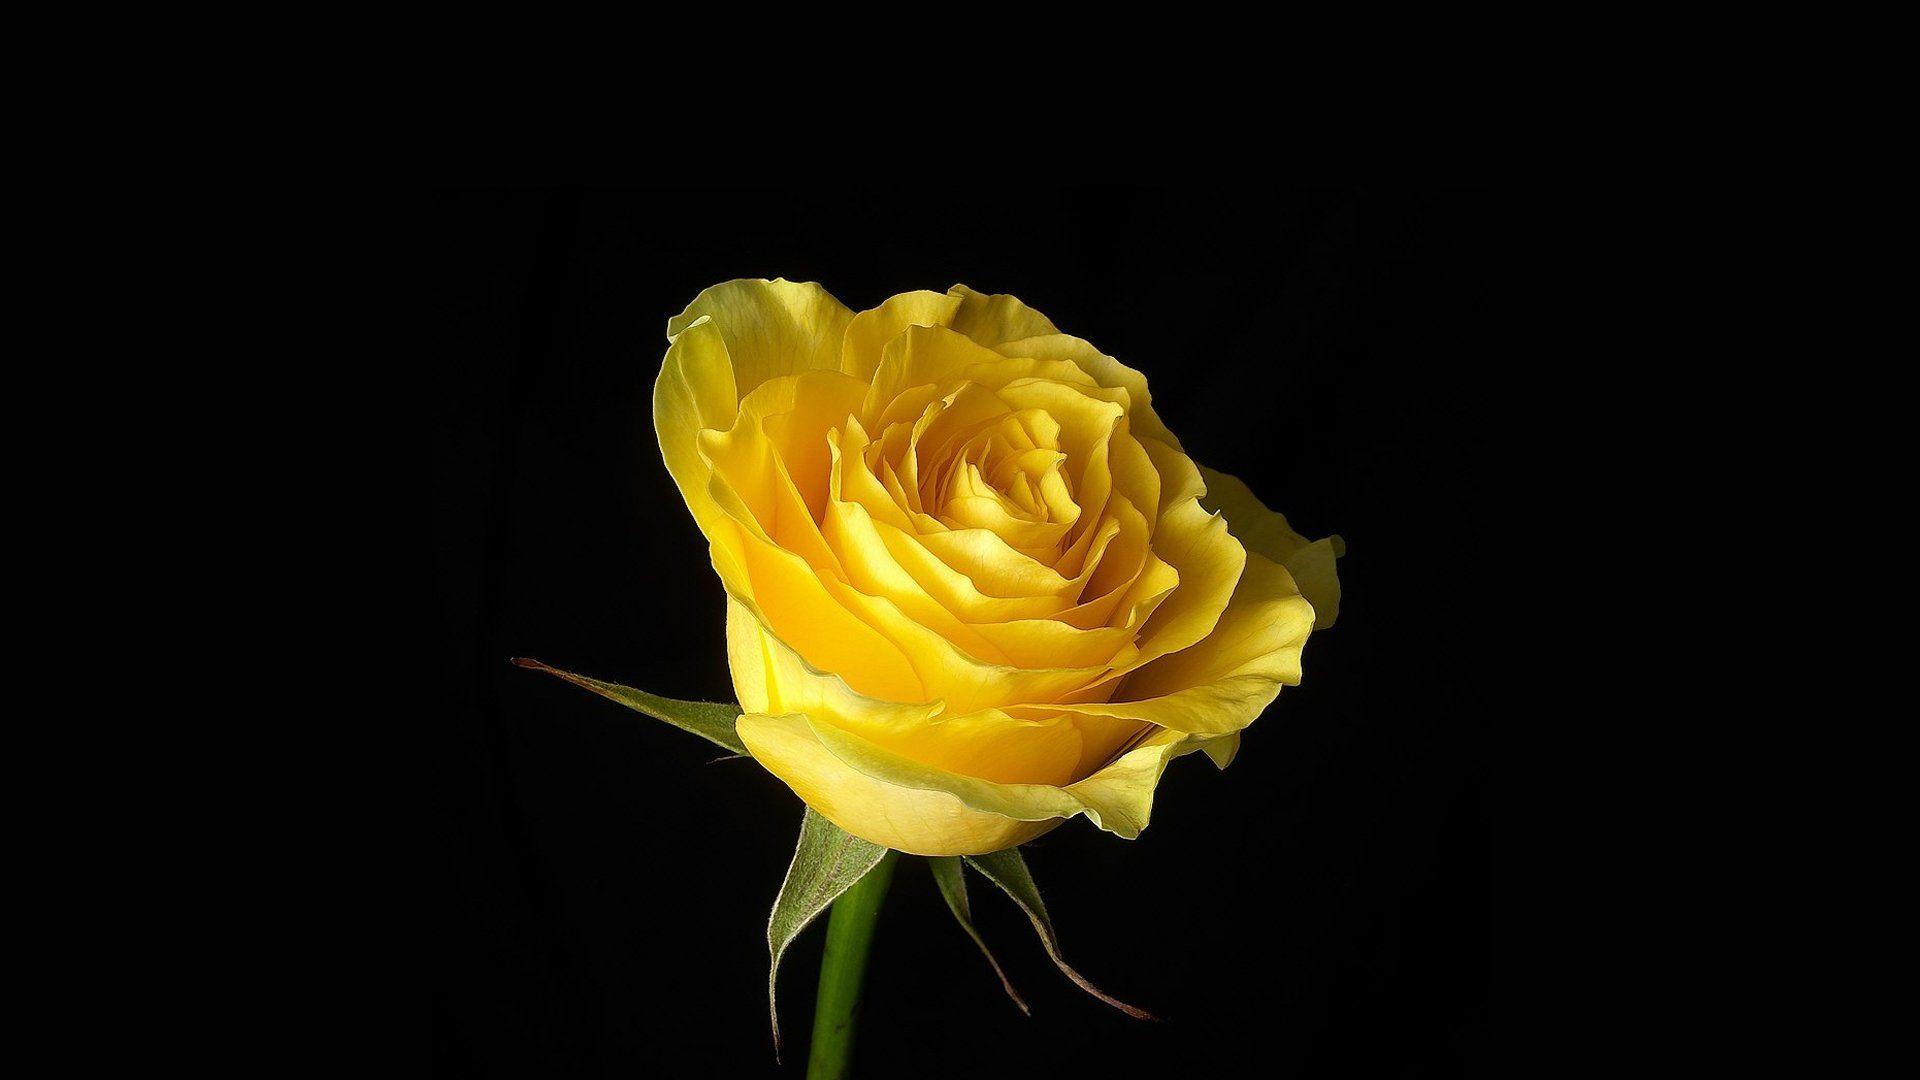 Black Wallpaper With Yellow Flowers image picture. Free